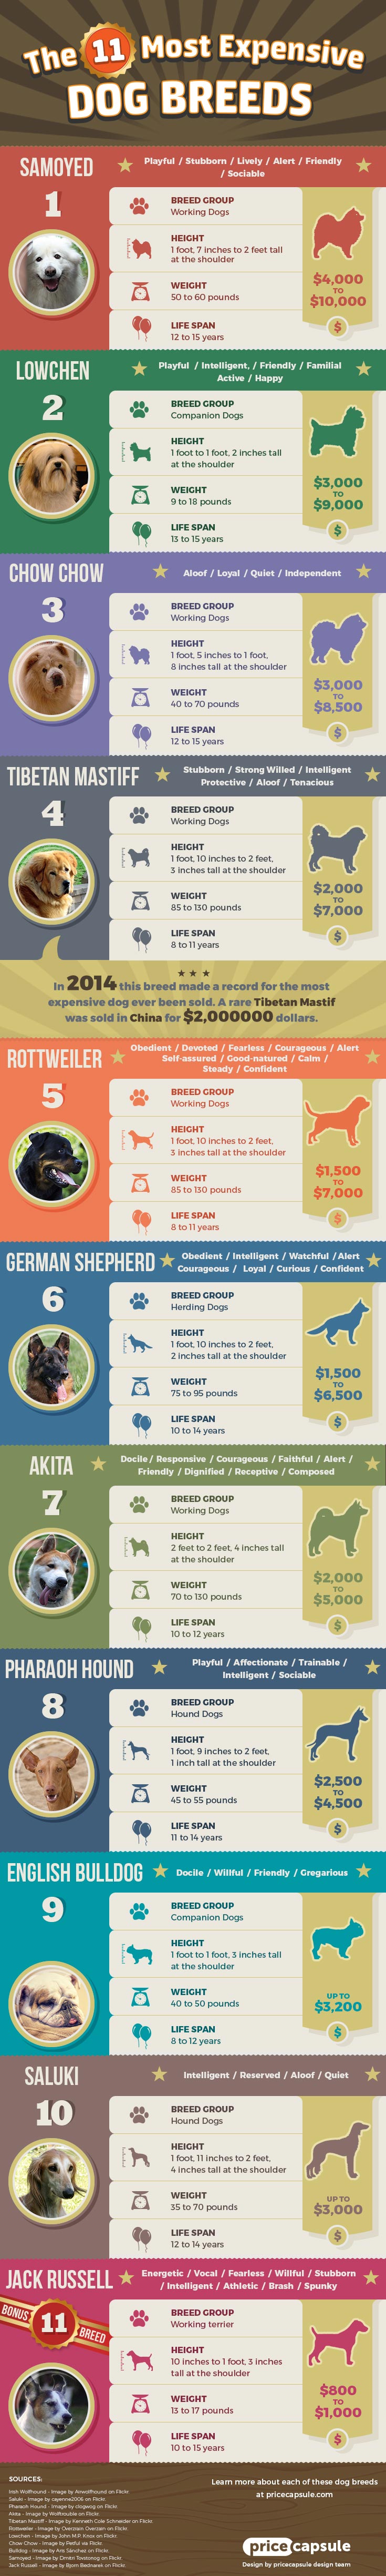 The Most Expensive Dog Breeds